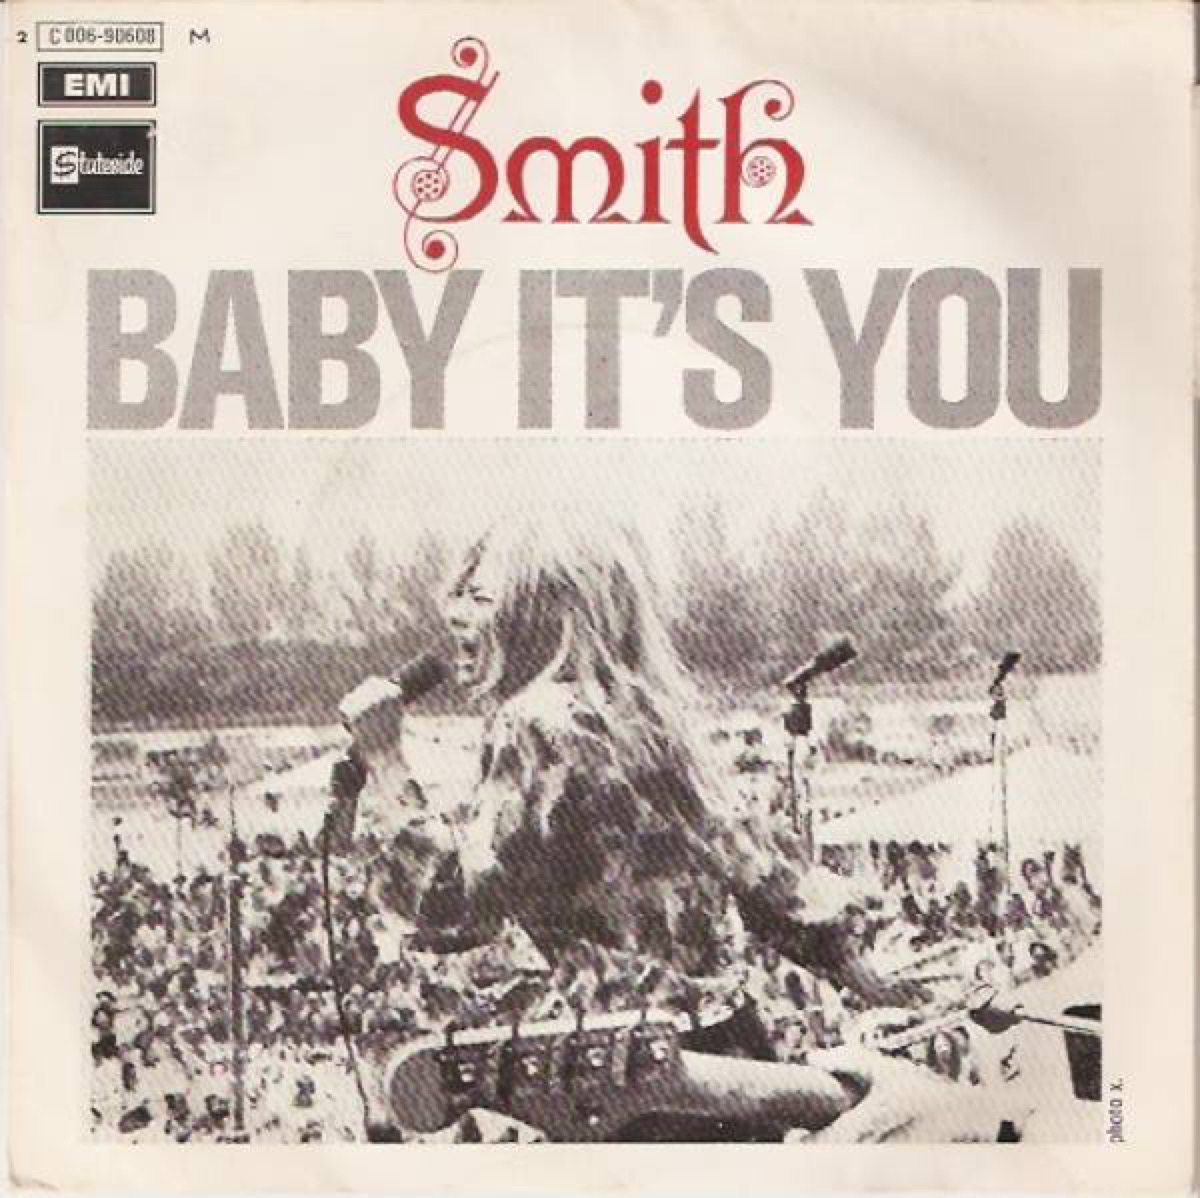 smith baby its you single cover, 1969 songs